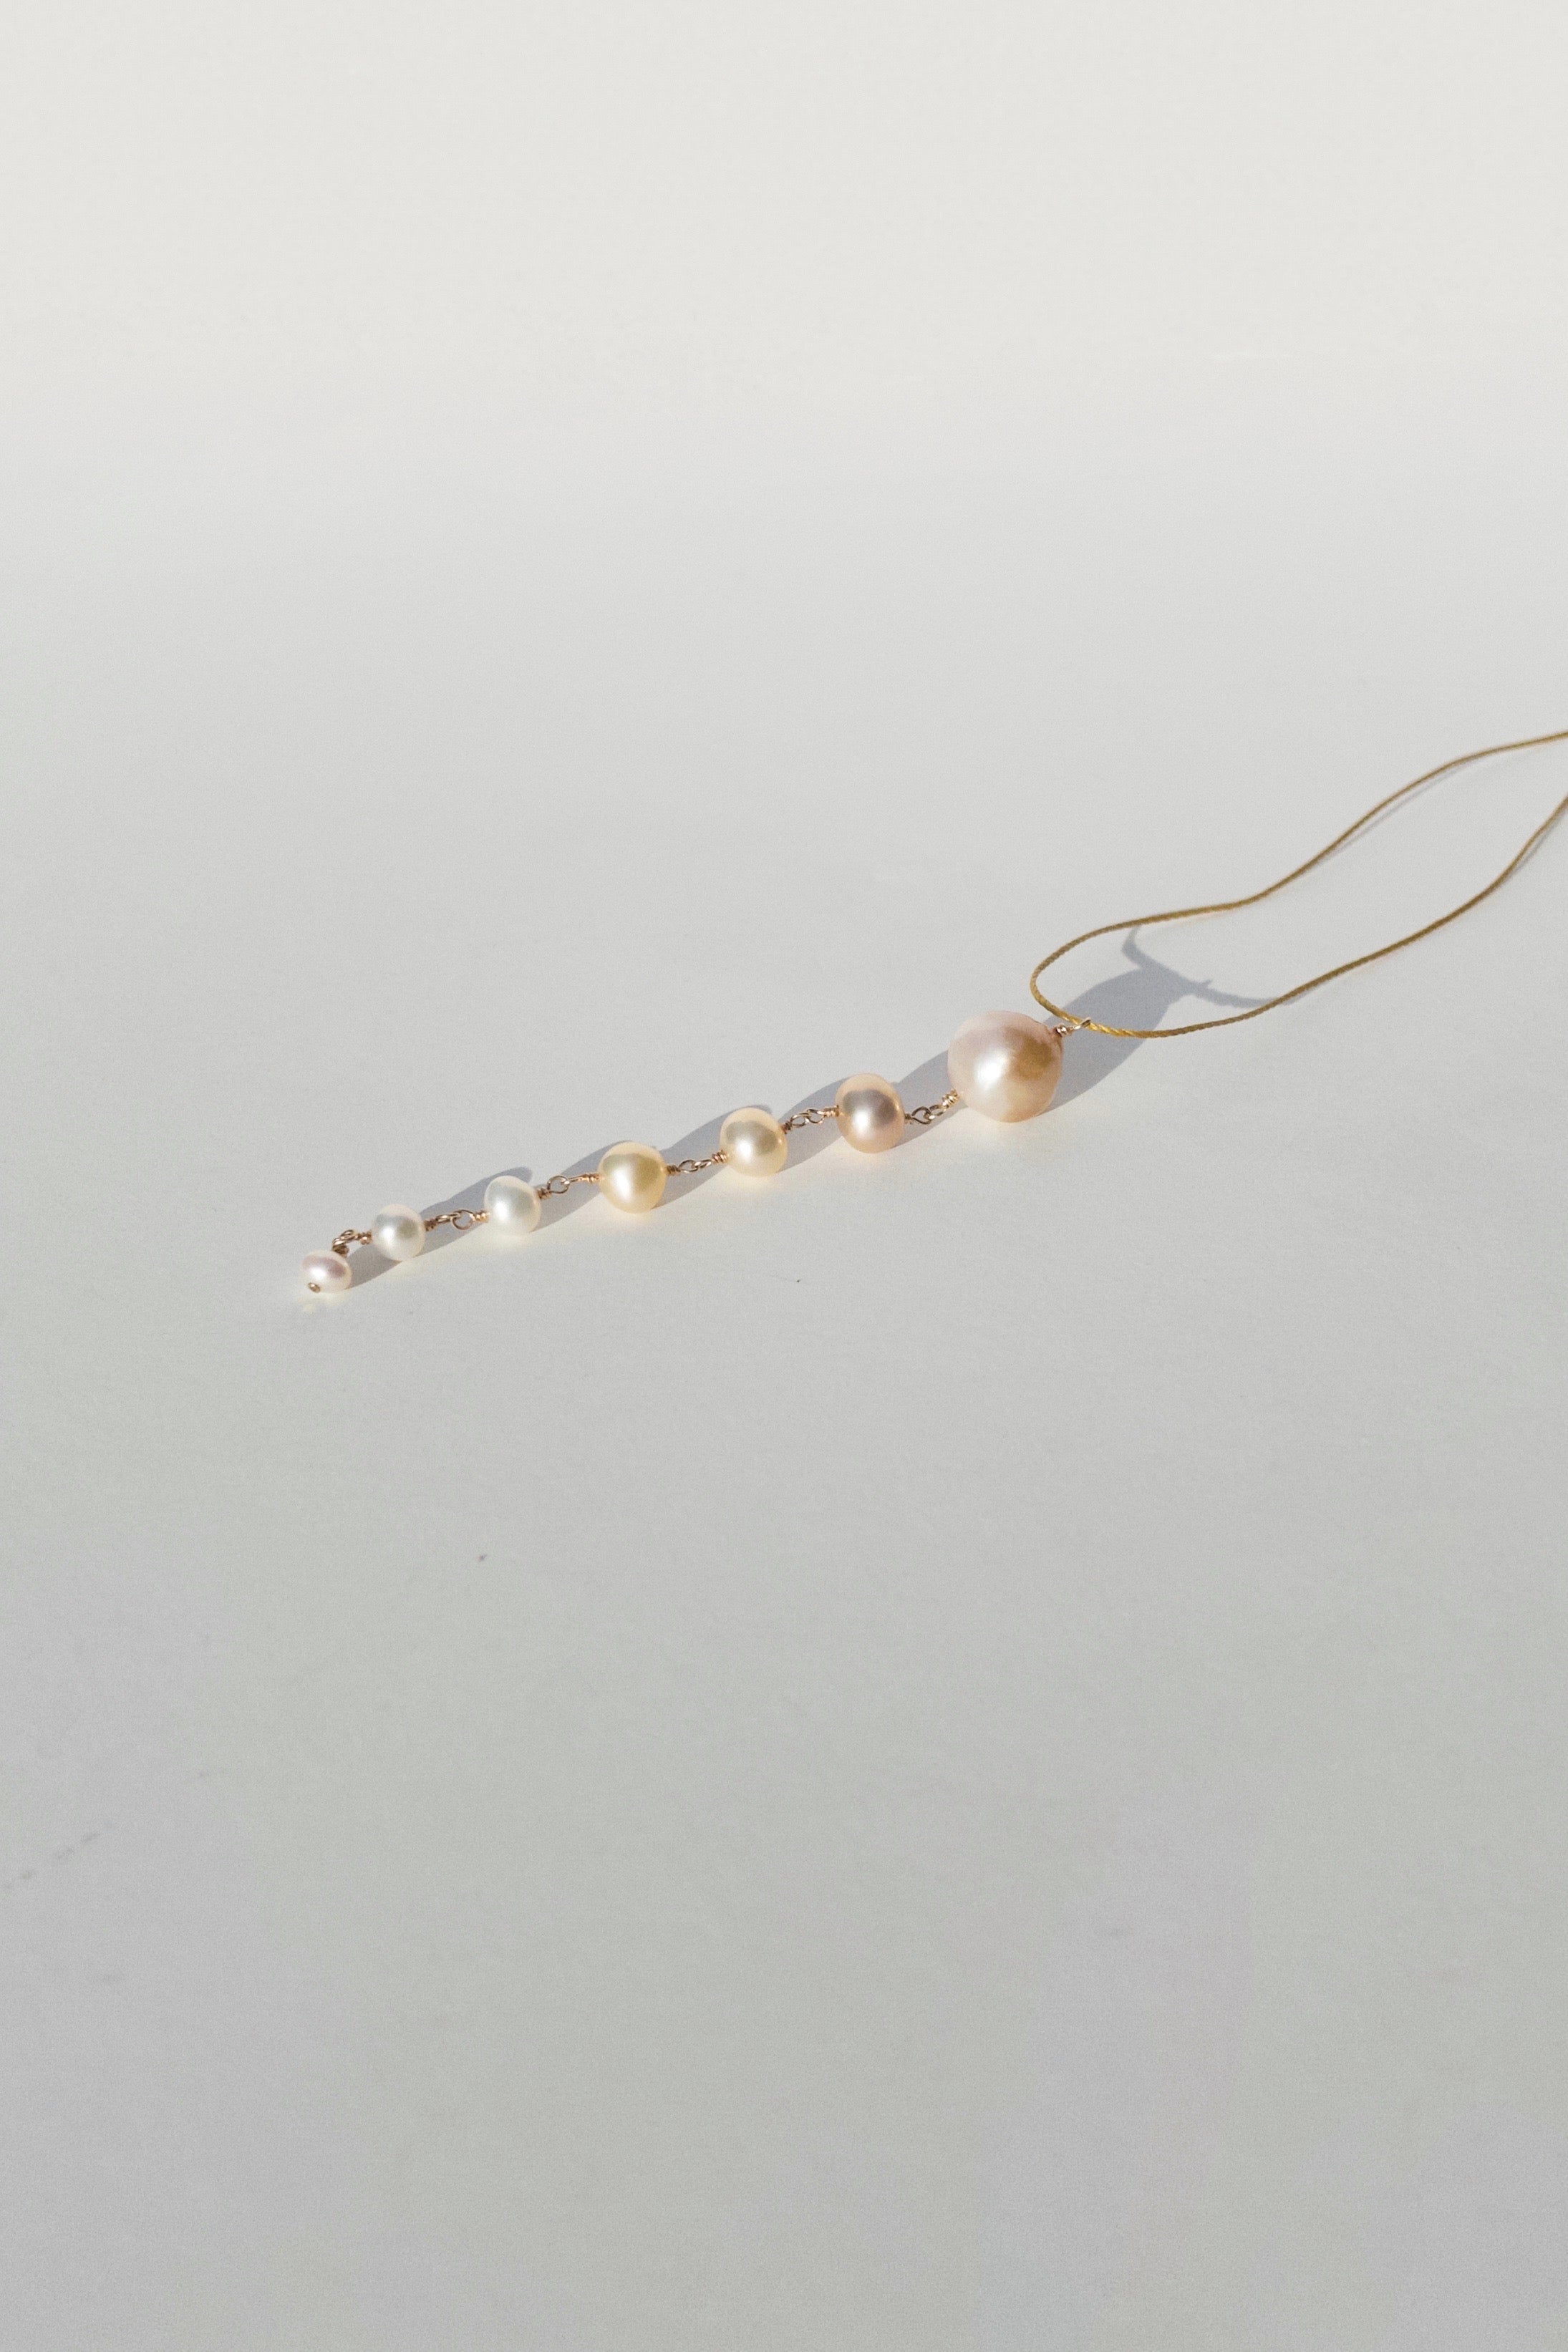 Cascade Necklace with Baroque Pearl